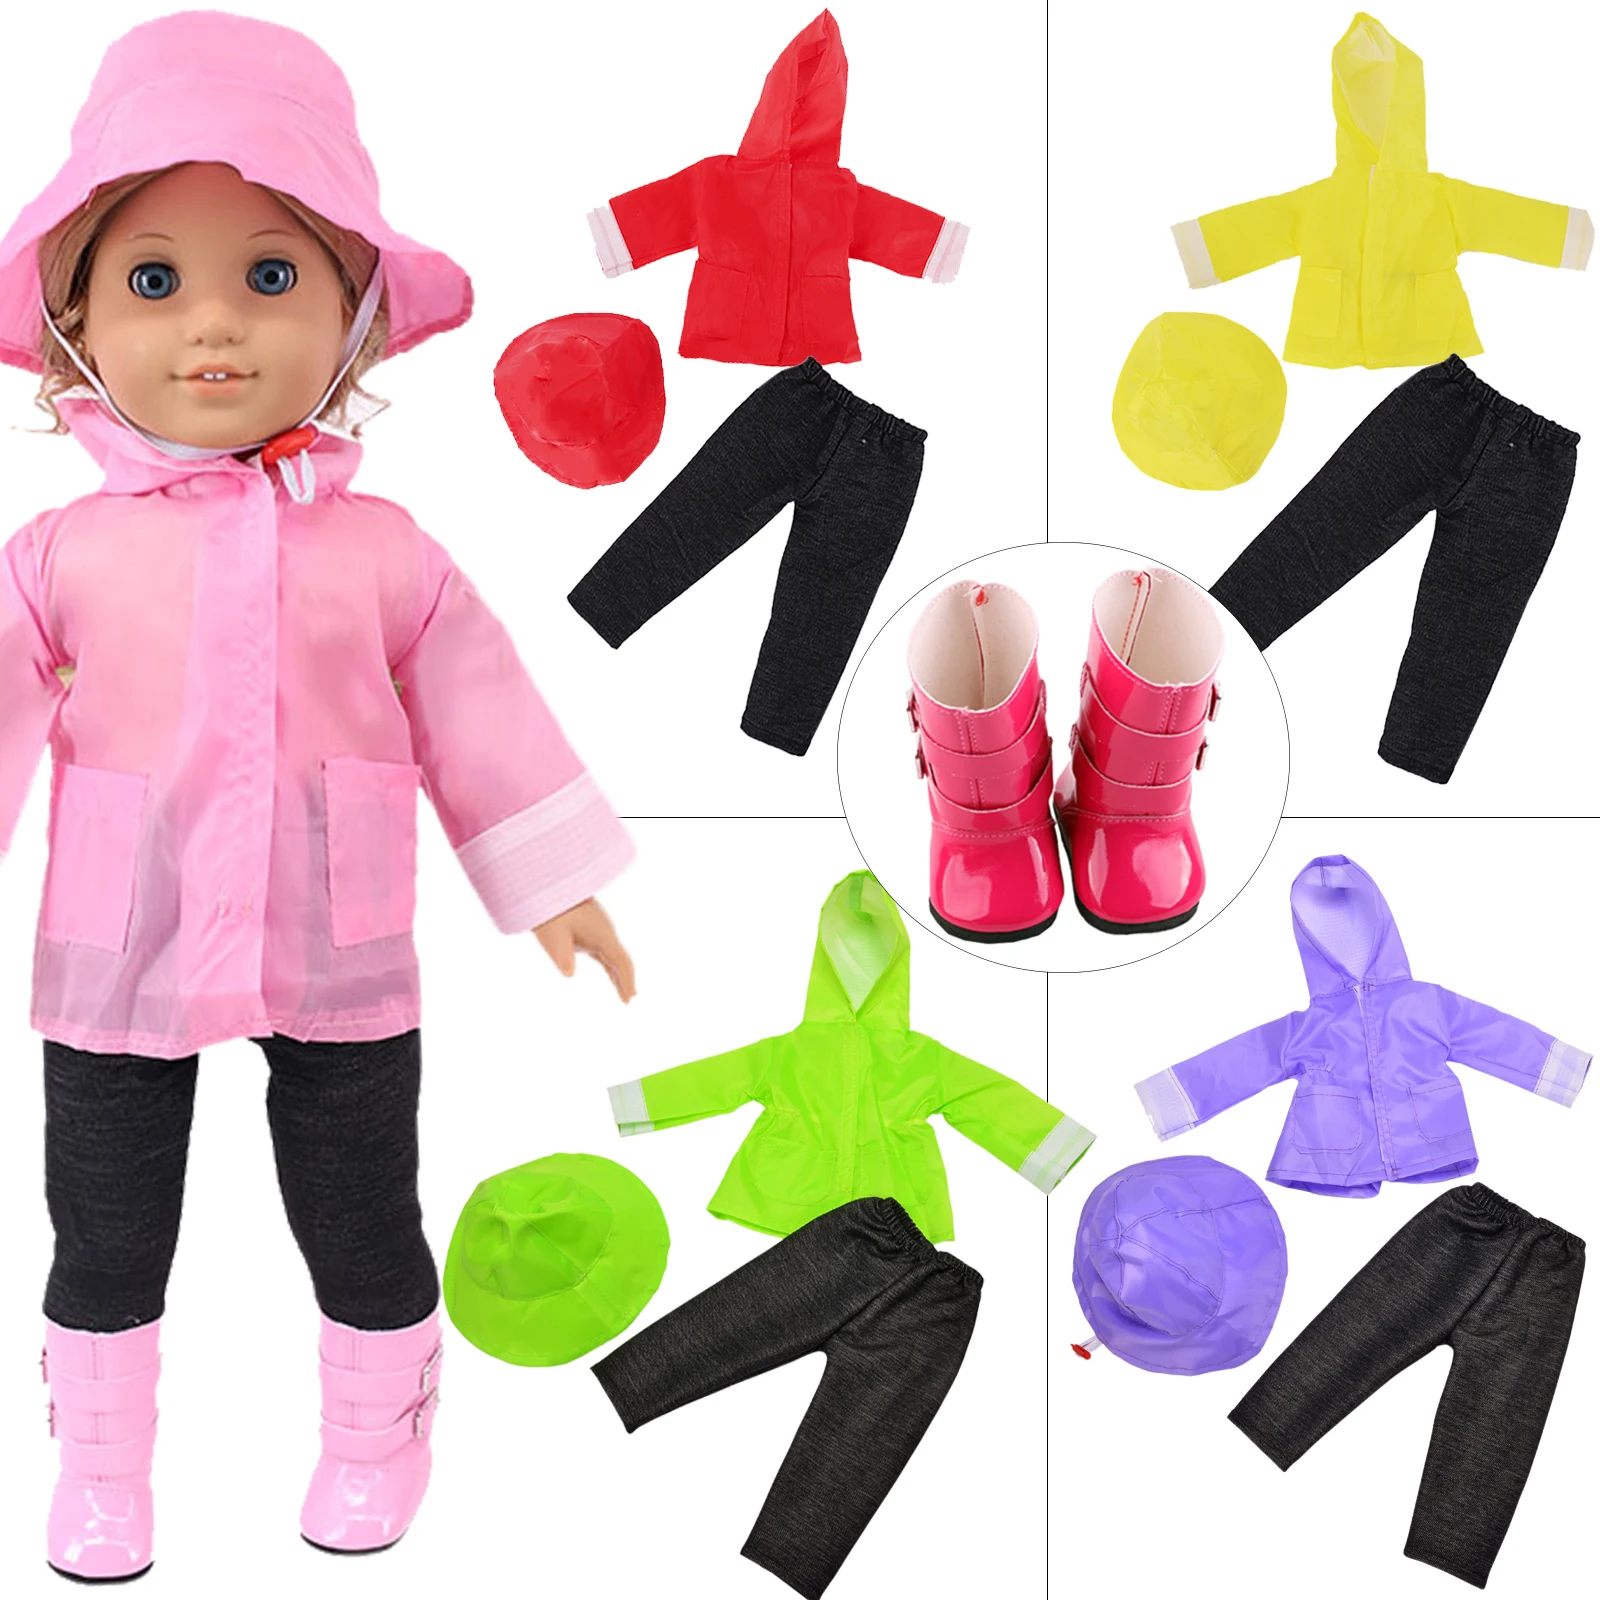 Hats For 18 Inch American Of Girl`s&43cm Reborn Baby New Bor